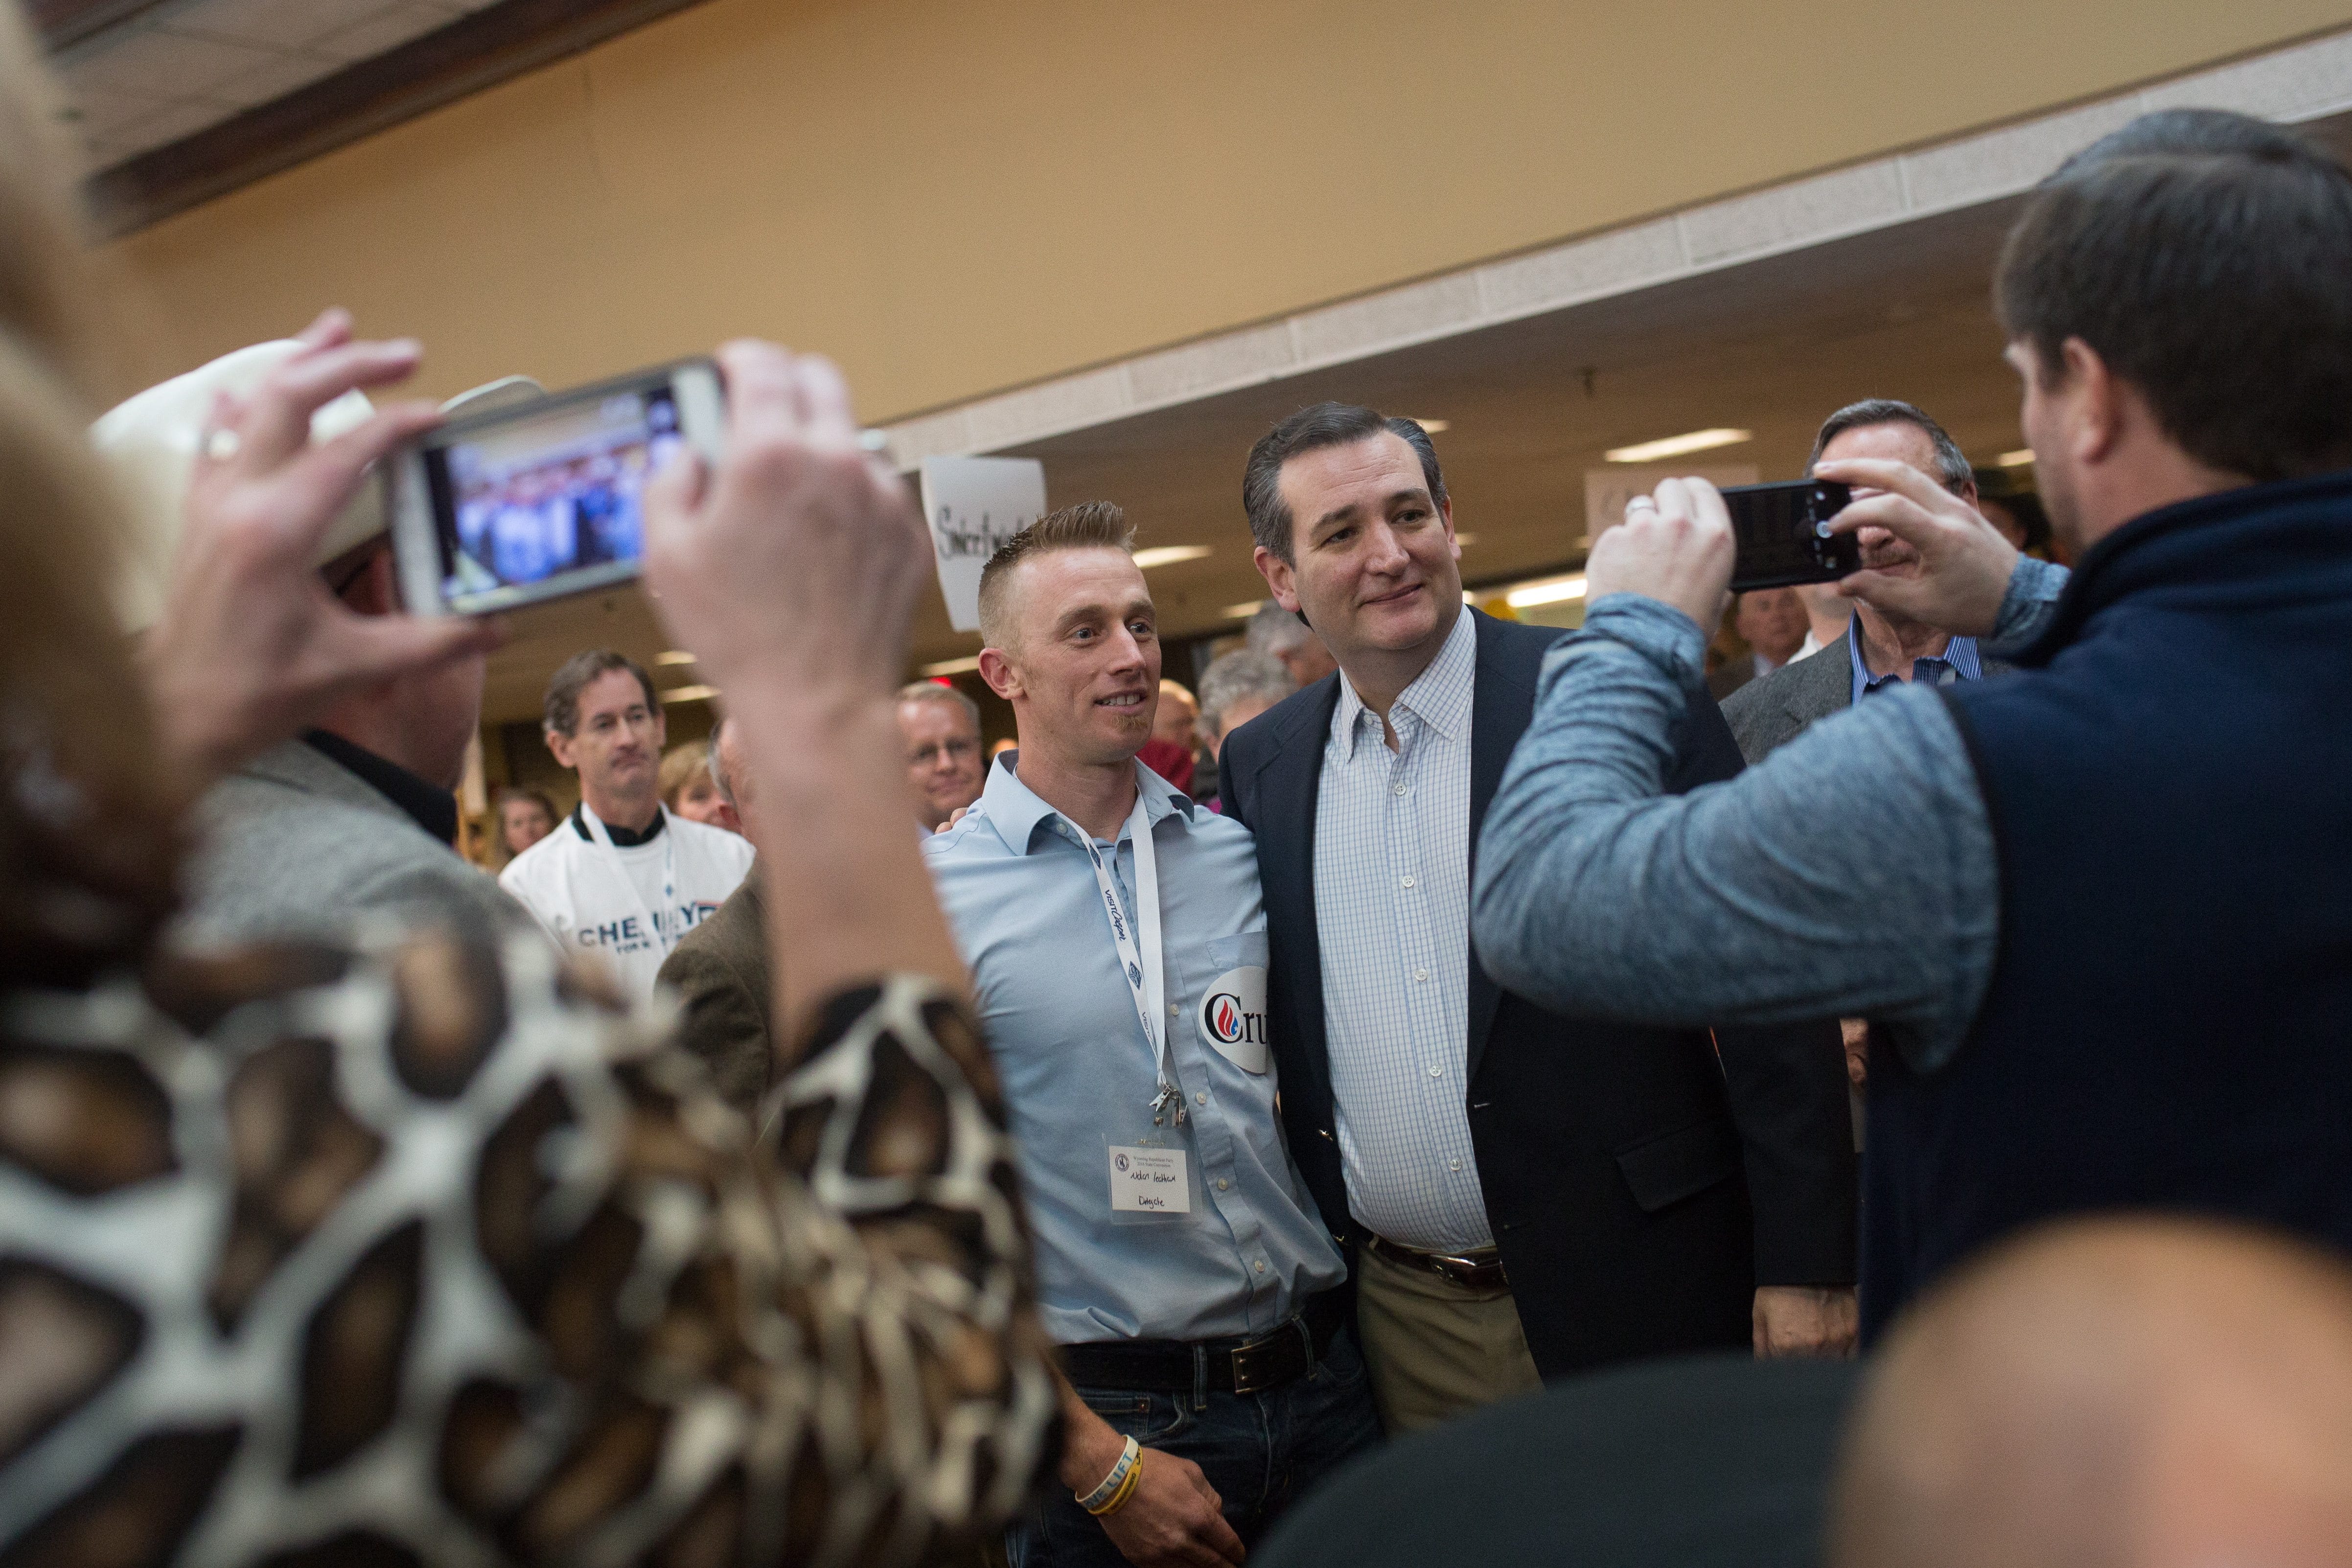 Republican presidential candidate Sen. Ted Cruz poses with Nolan Latham, a delegate from Sweetwater county, after a speech during the Wyoming GOP Convention on Saturday, April 16, 2016, at the Parkway Plaza Hotel and Convention Centre in Casper, Wyo.